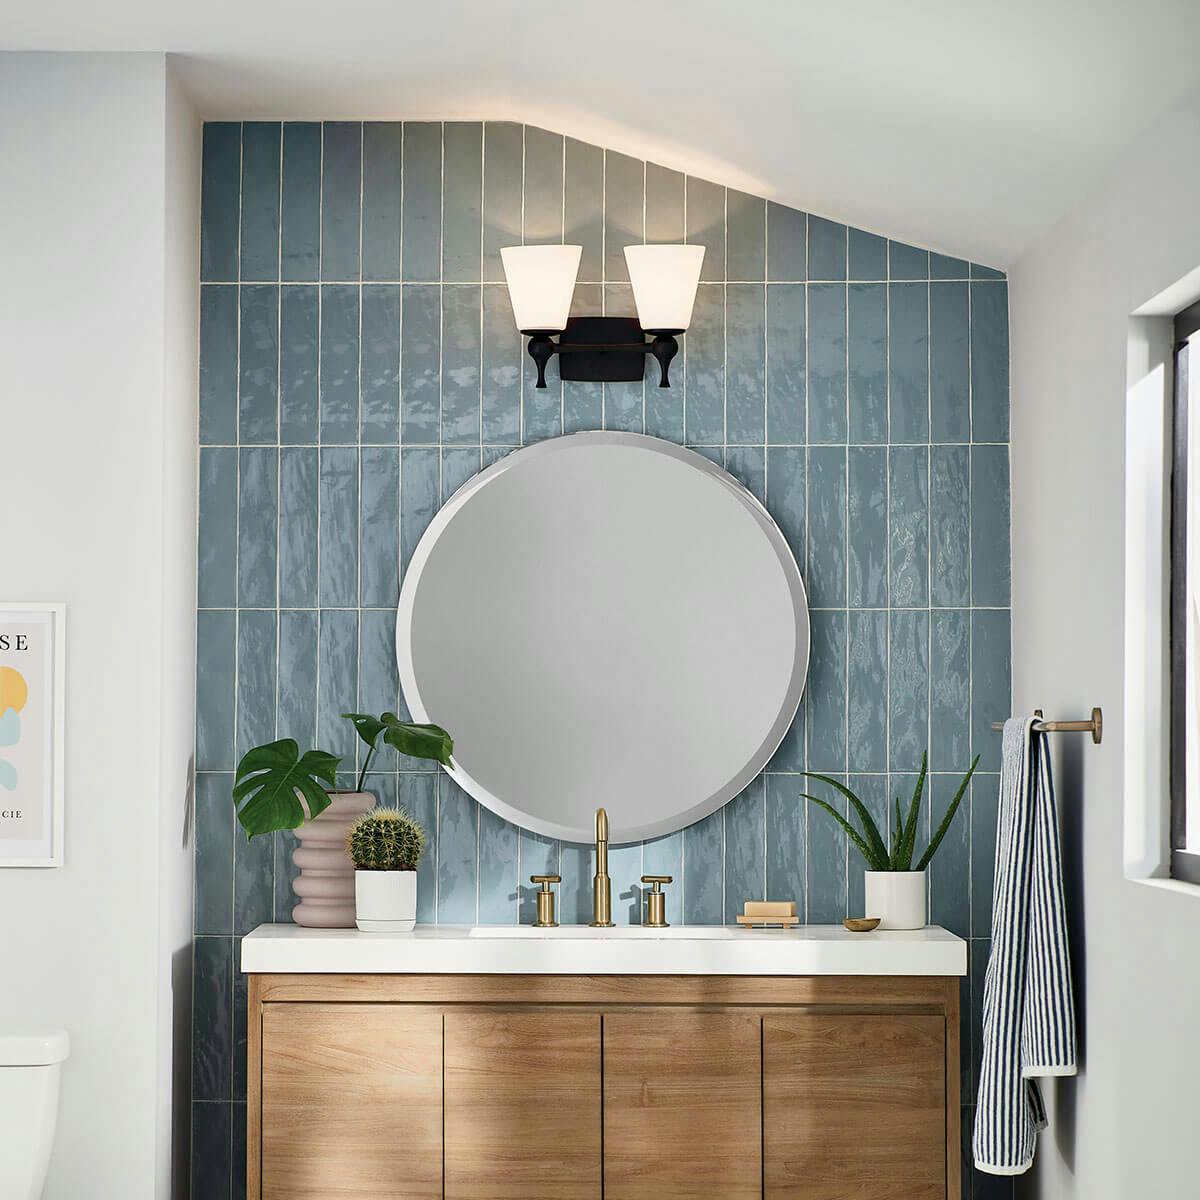 Day time Bathroom image featuring Cosabella vanity light 55091BK